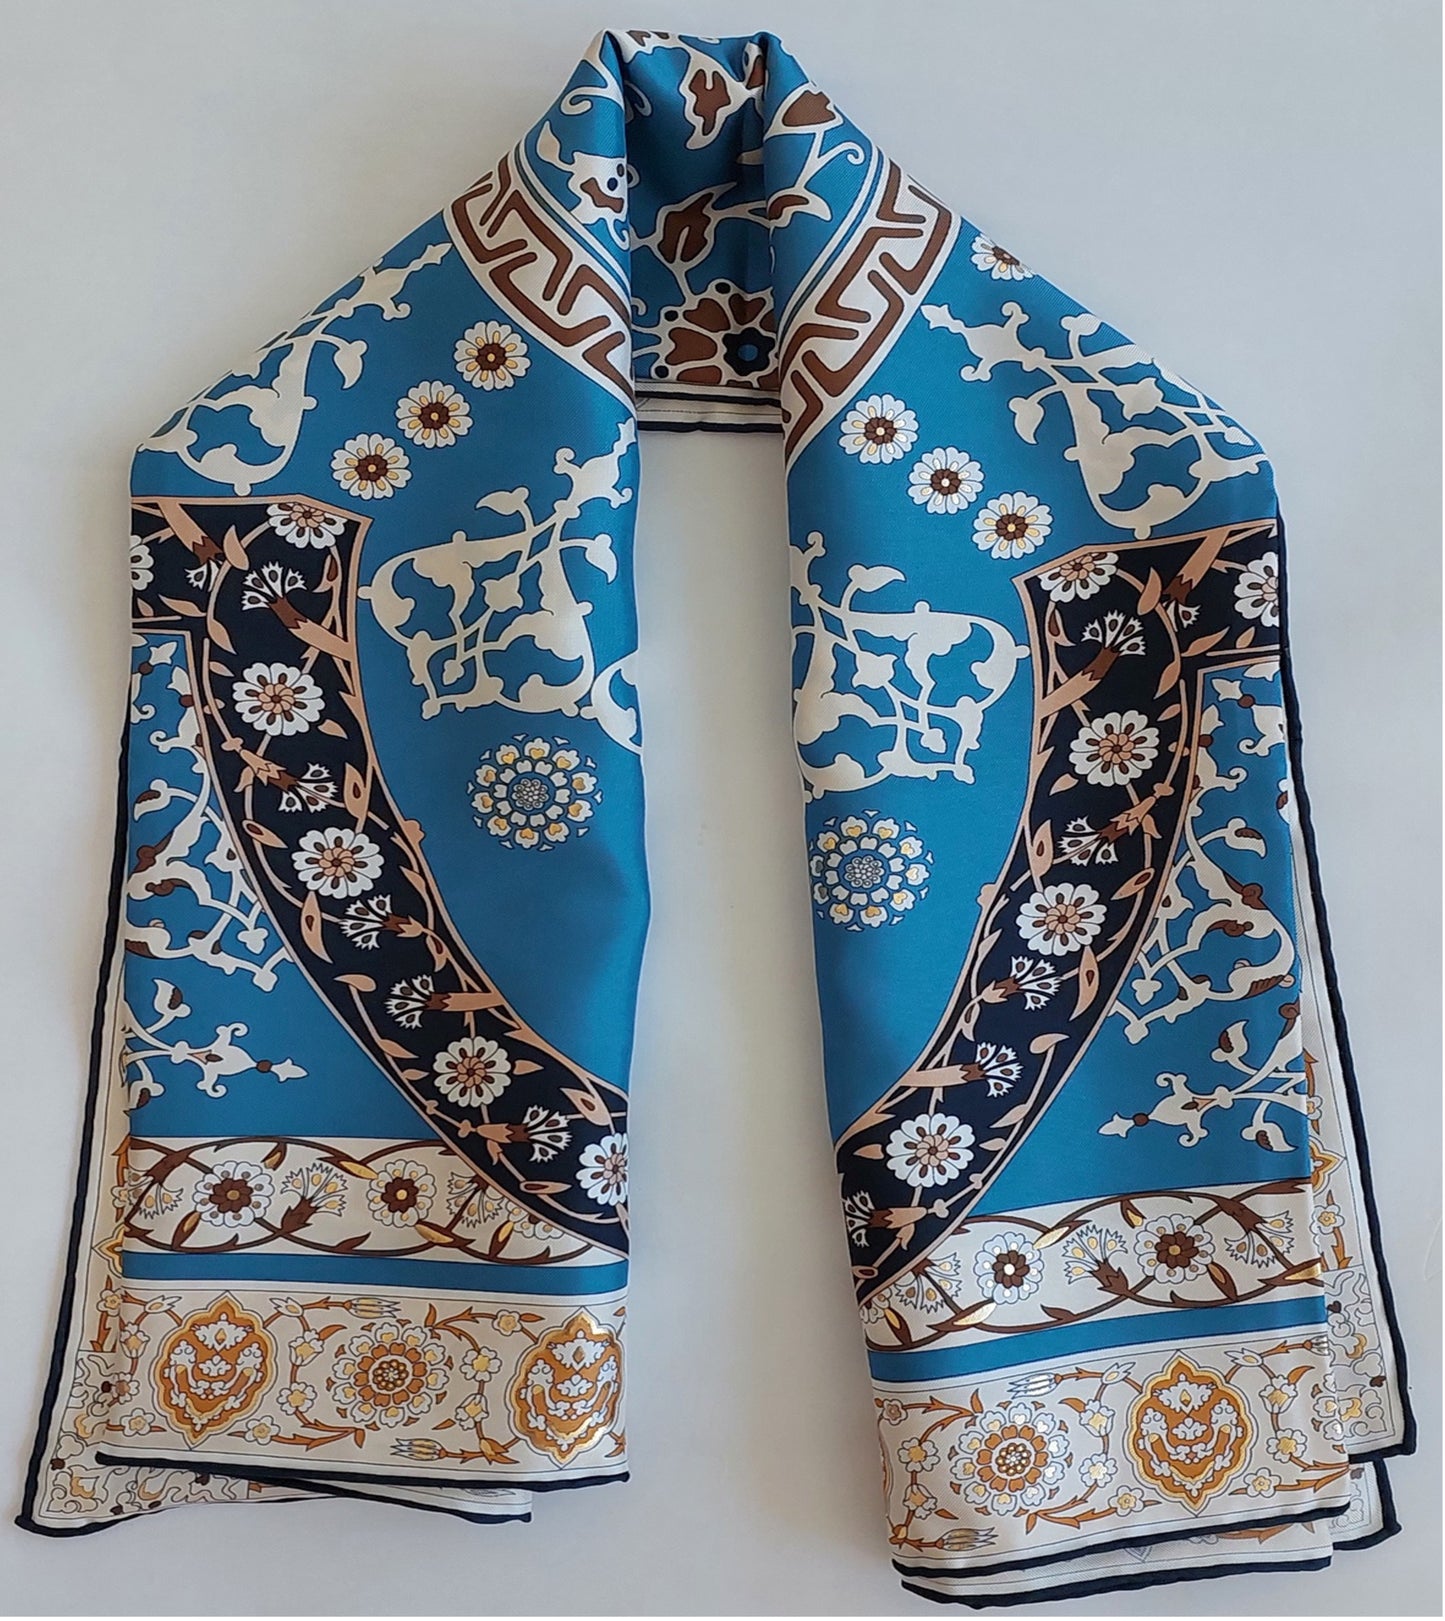 Woman Silk Scarf Geometric design Blue and White Gold Colors Hand rolled Stitch Great Gift for her in a beautiful box